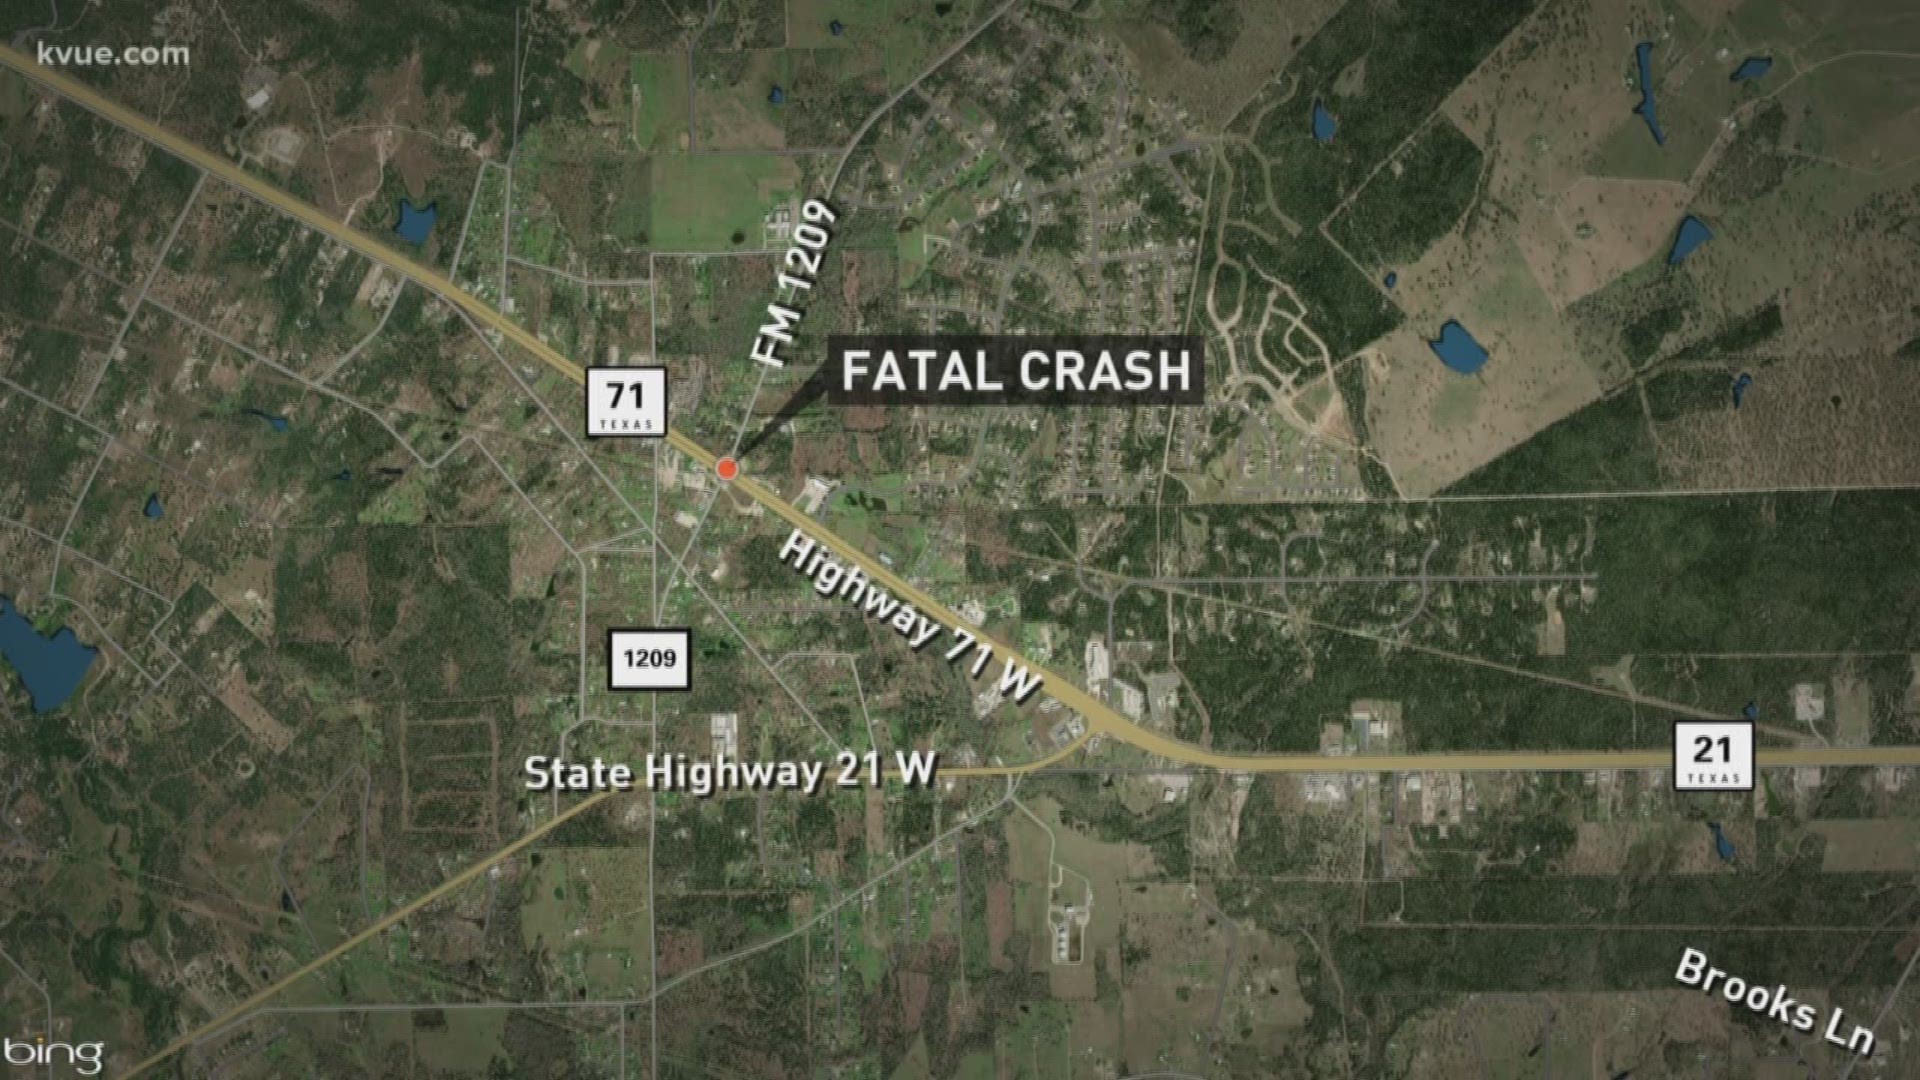 A fatal accident on Highway 71 lead to lane closures for several hours on Dec. 23.